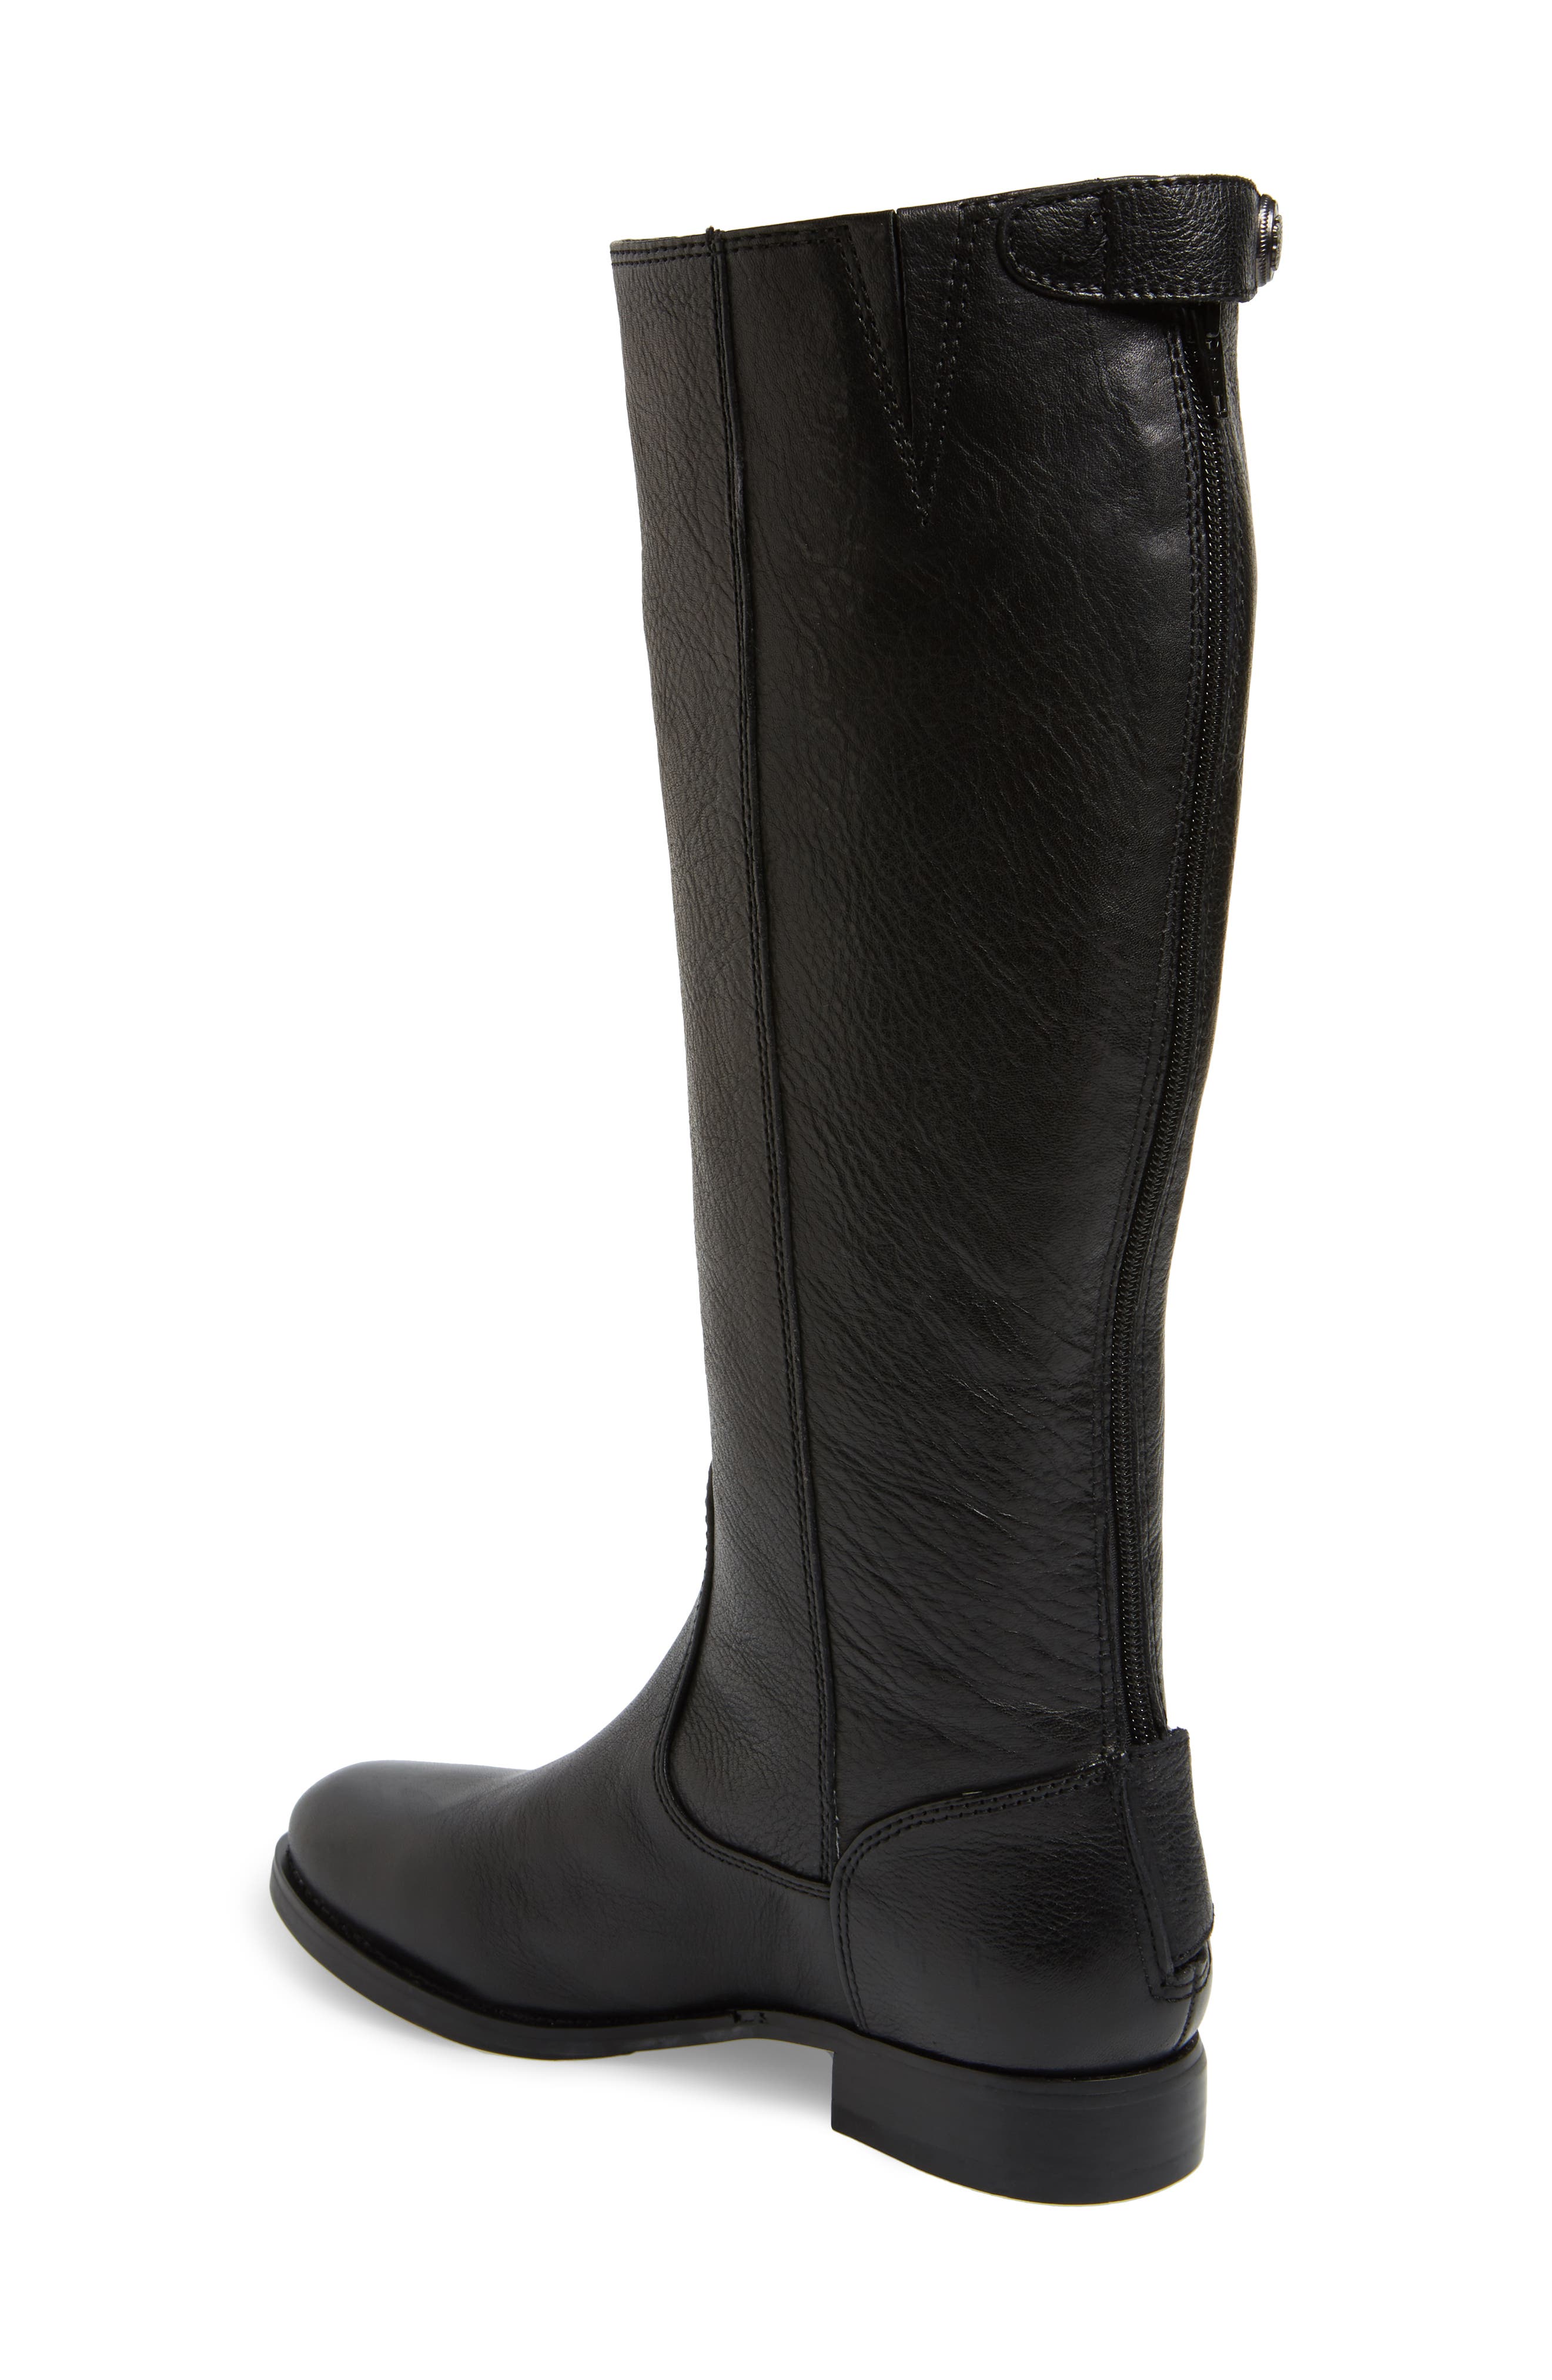 7s knee high boots